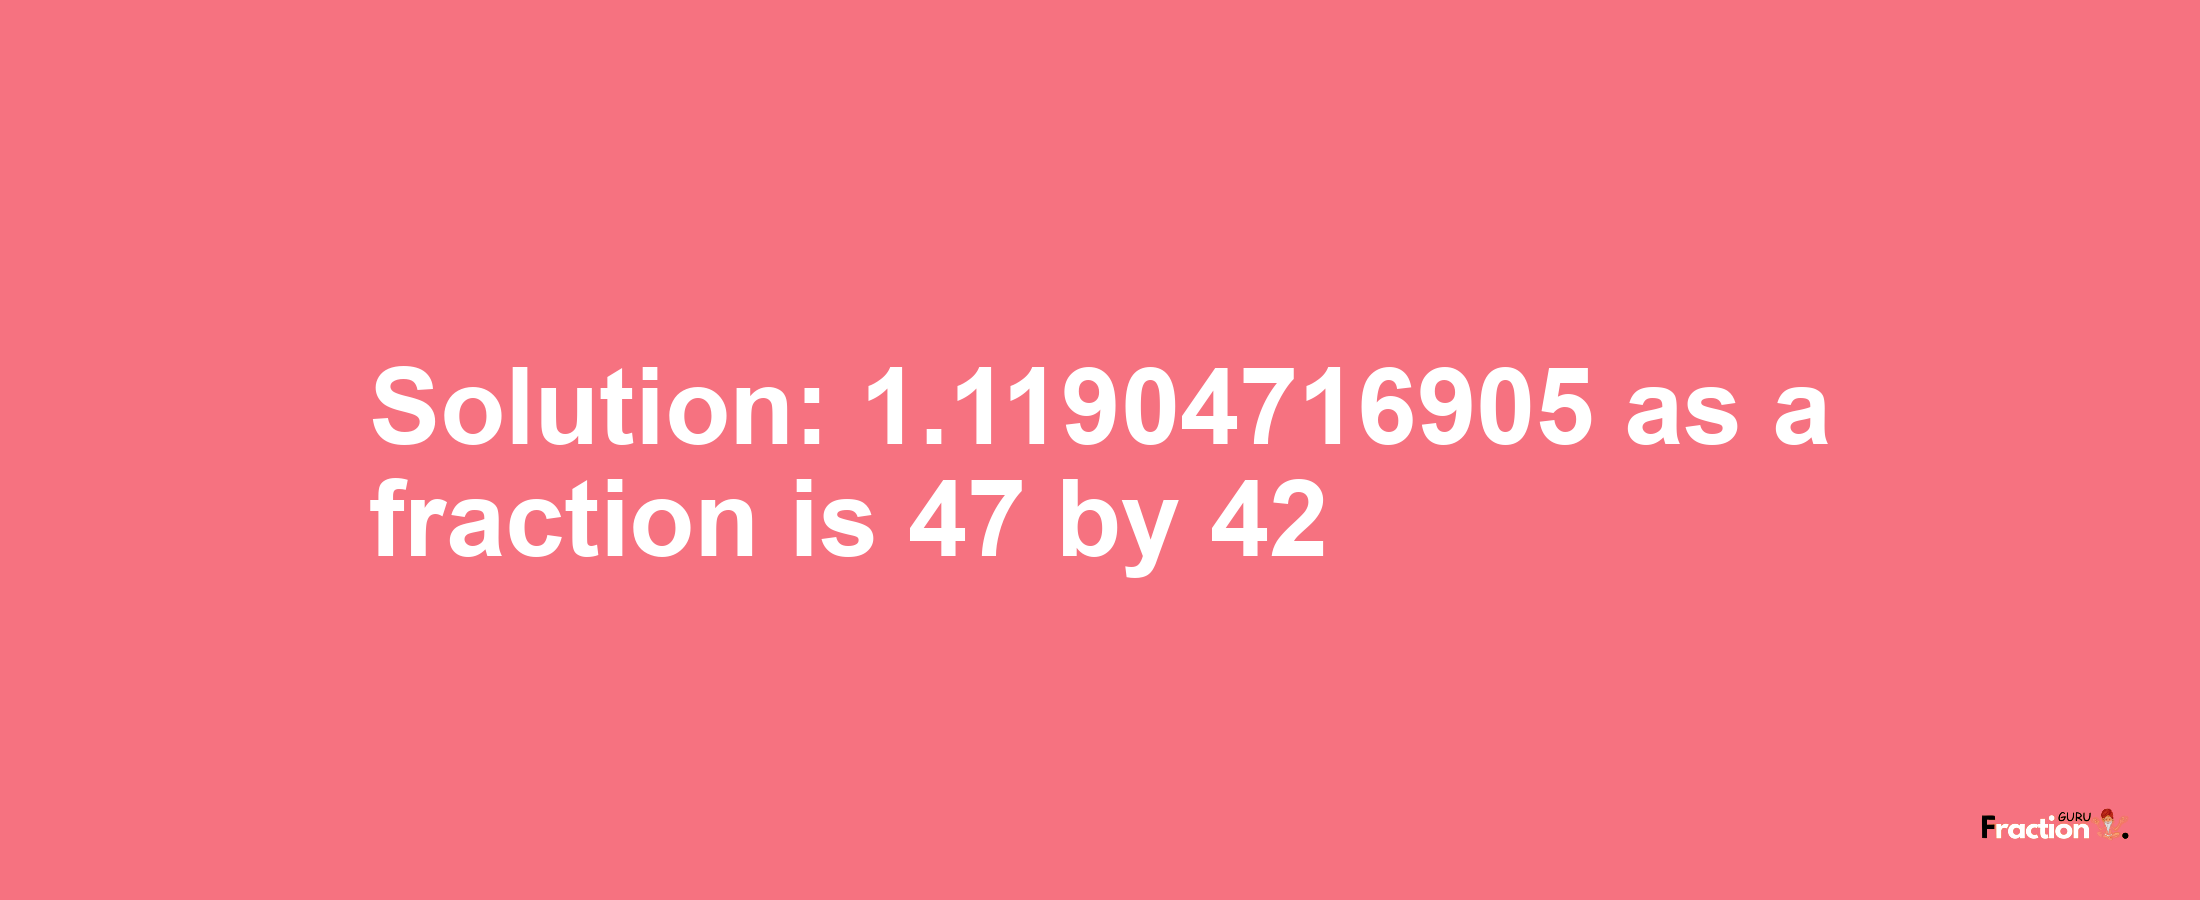 Solution:1.11904716905 as a fraction is 47/42